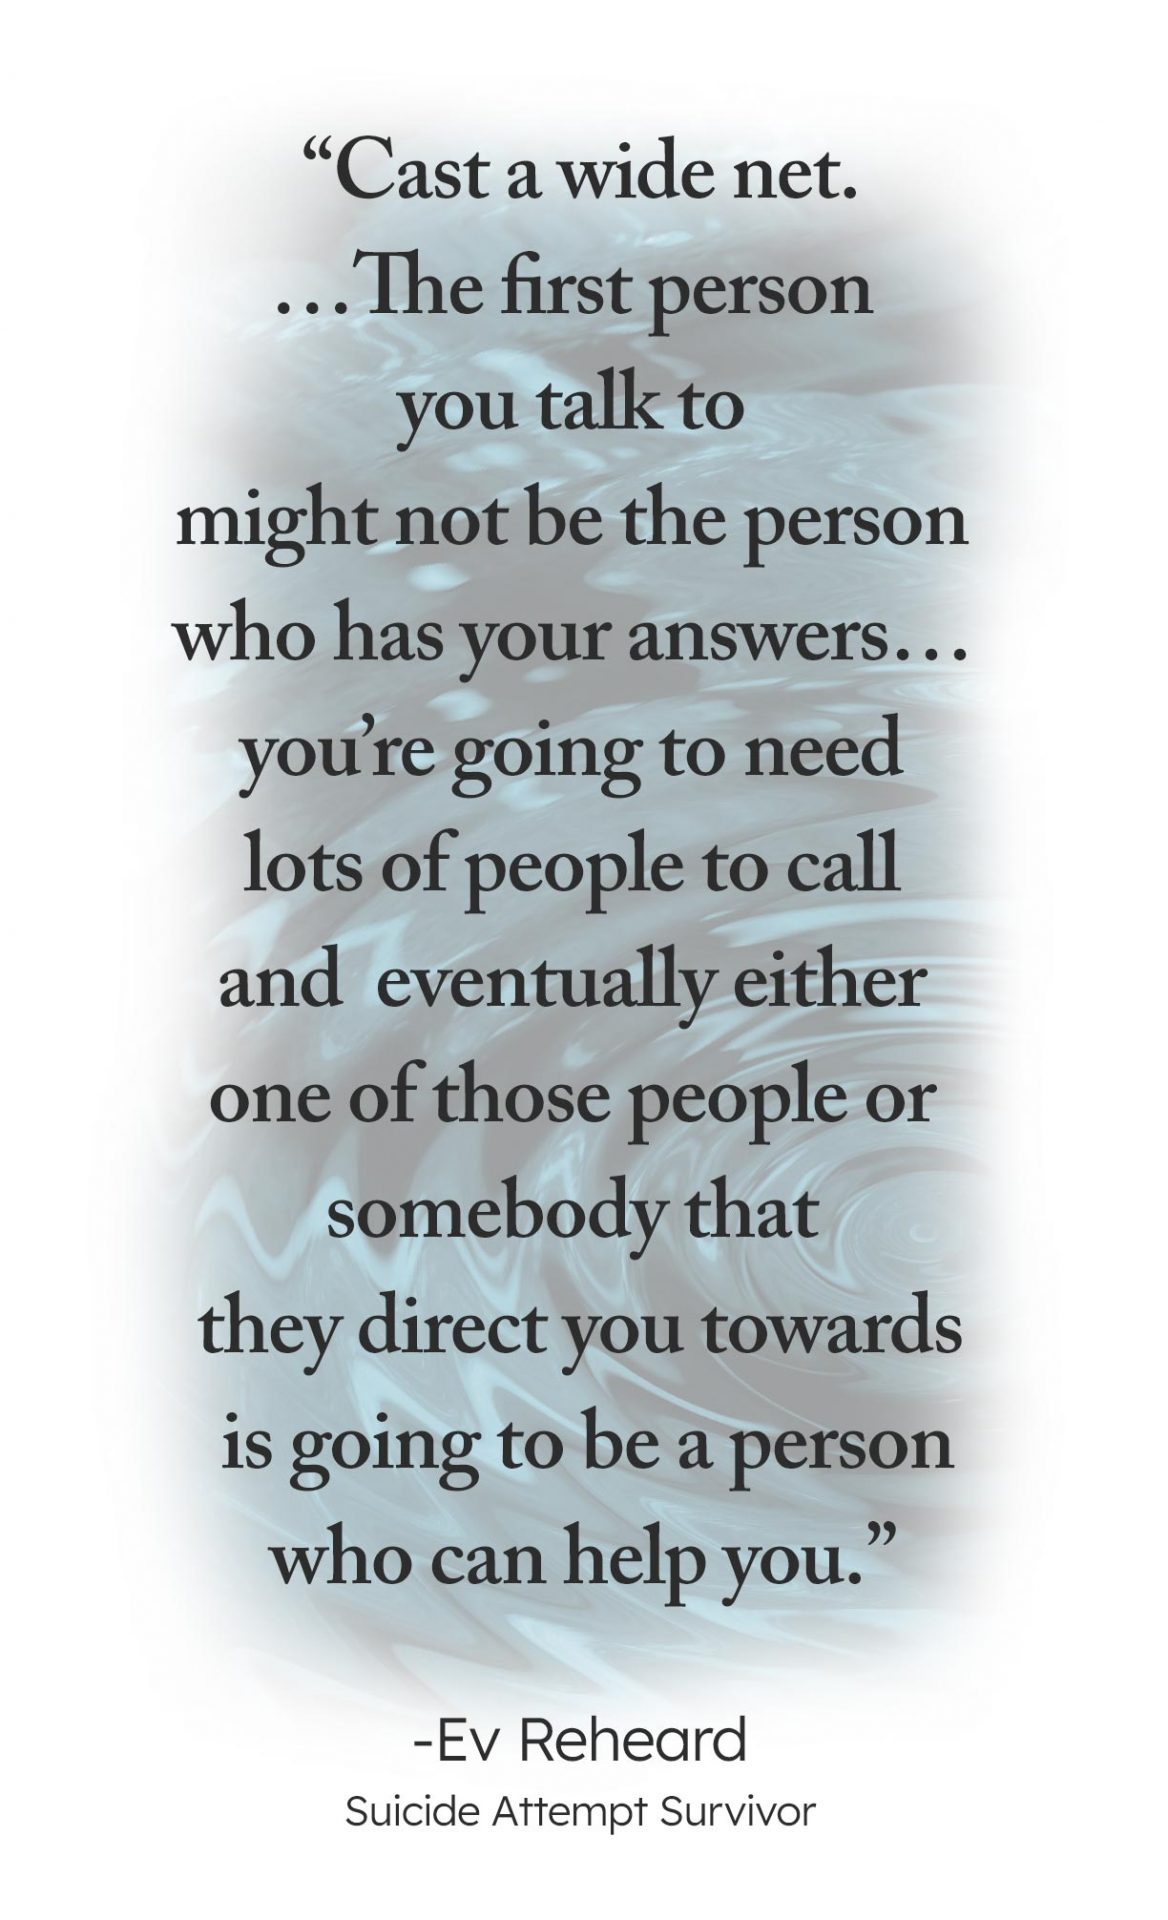 "Cast a wide net. … The first person you talk to might not be the person who has your answers … you're going to need lots of people to call and eventually either one of those people or somebody that they direct you towards is going to be a person who can help you." -Ev Reheard Suicide Attempt Survivor